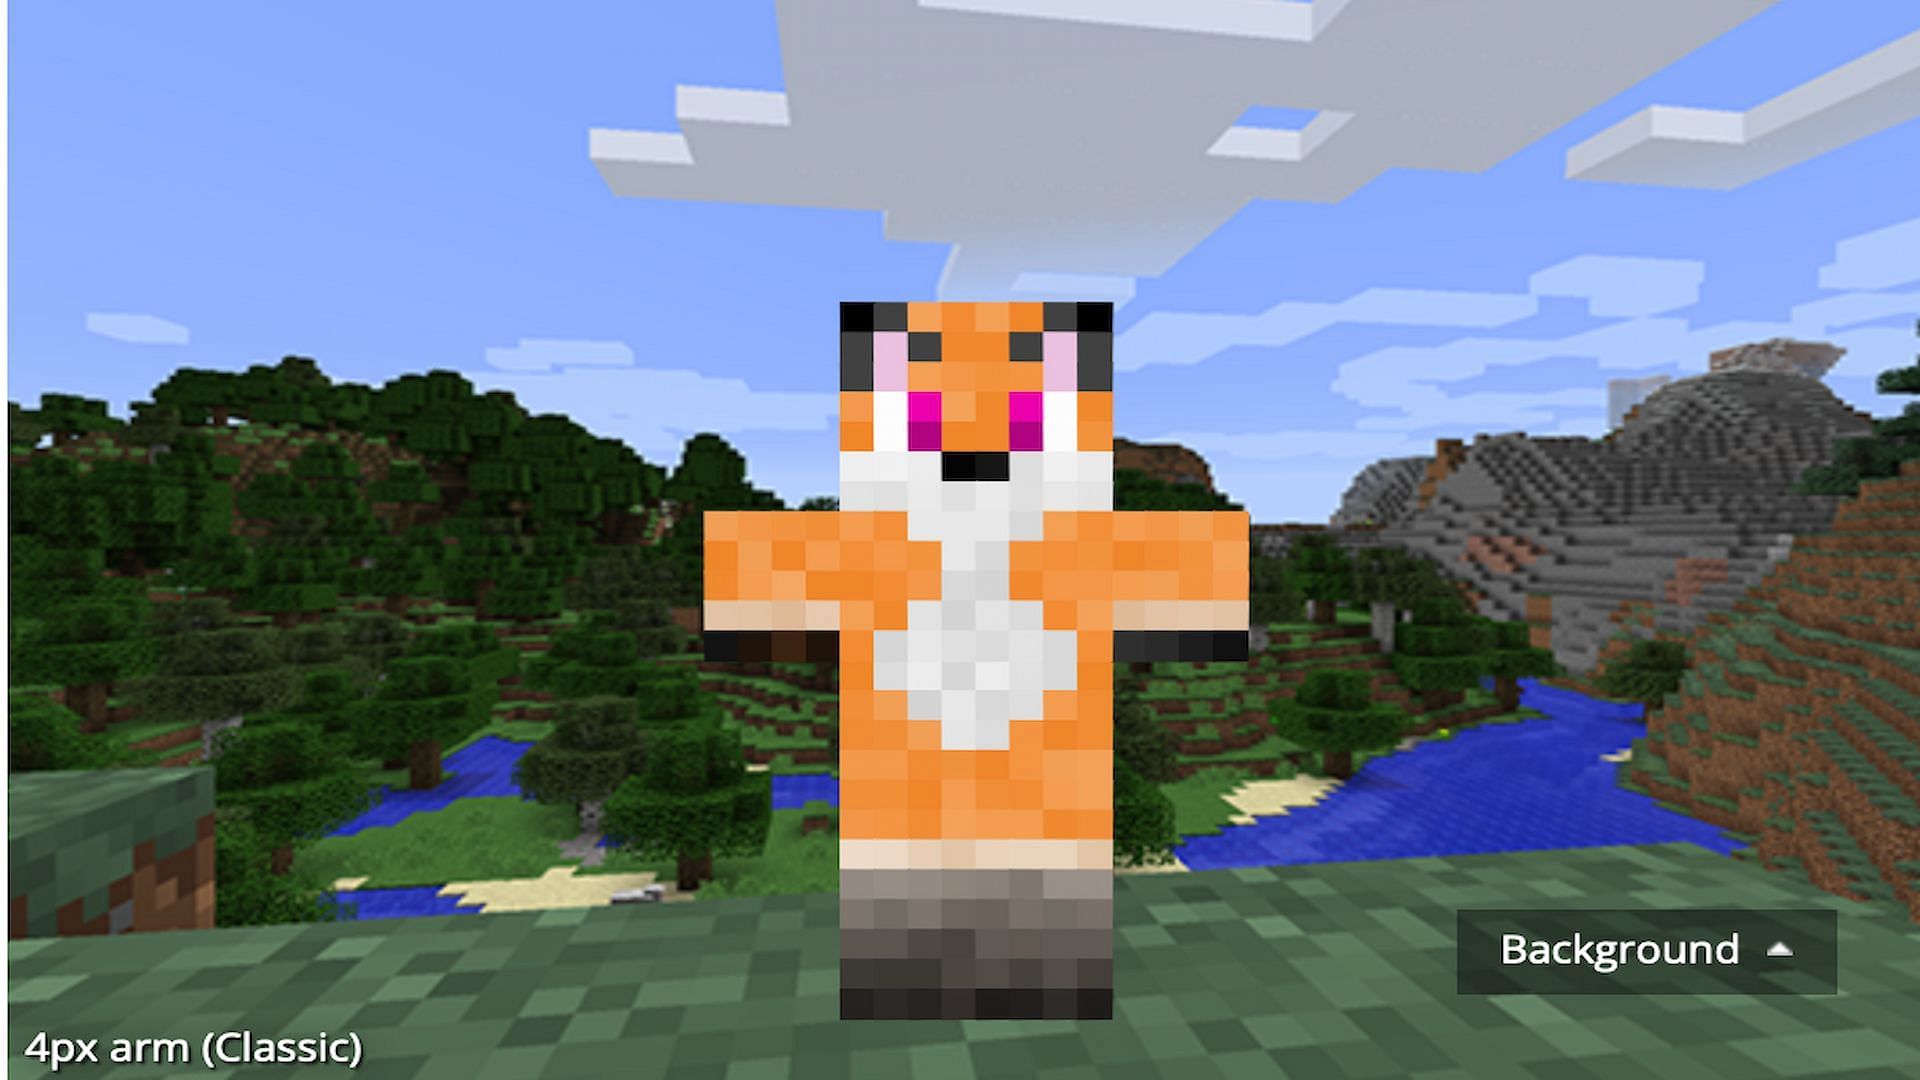 This cute fox skin is a great choice for players to get in touch with nature (Image via Mojang/ www.minecraftskins.com)